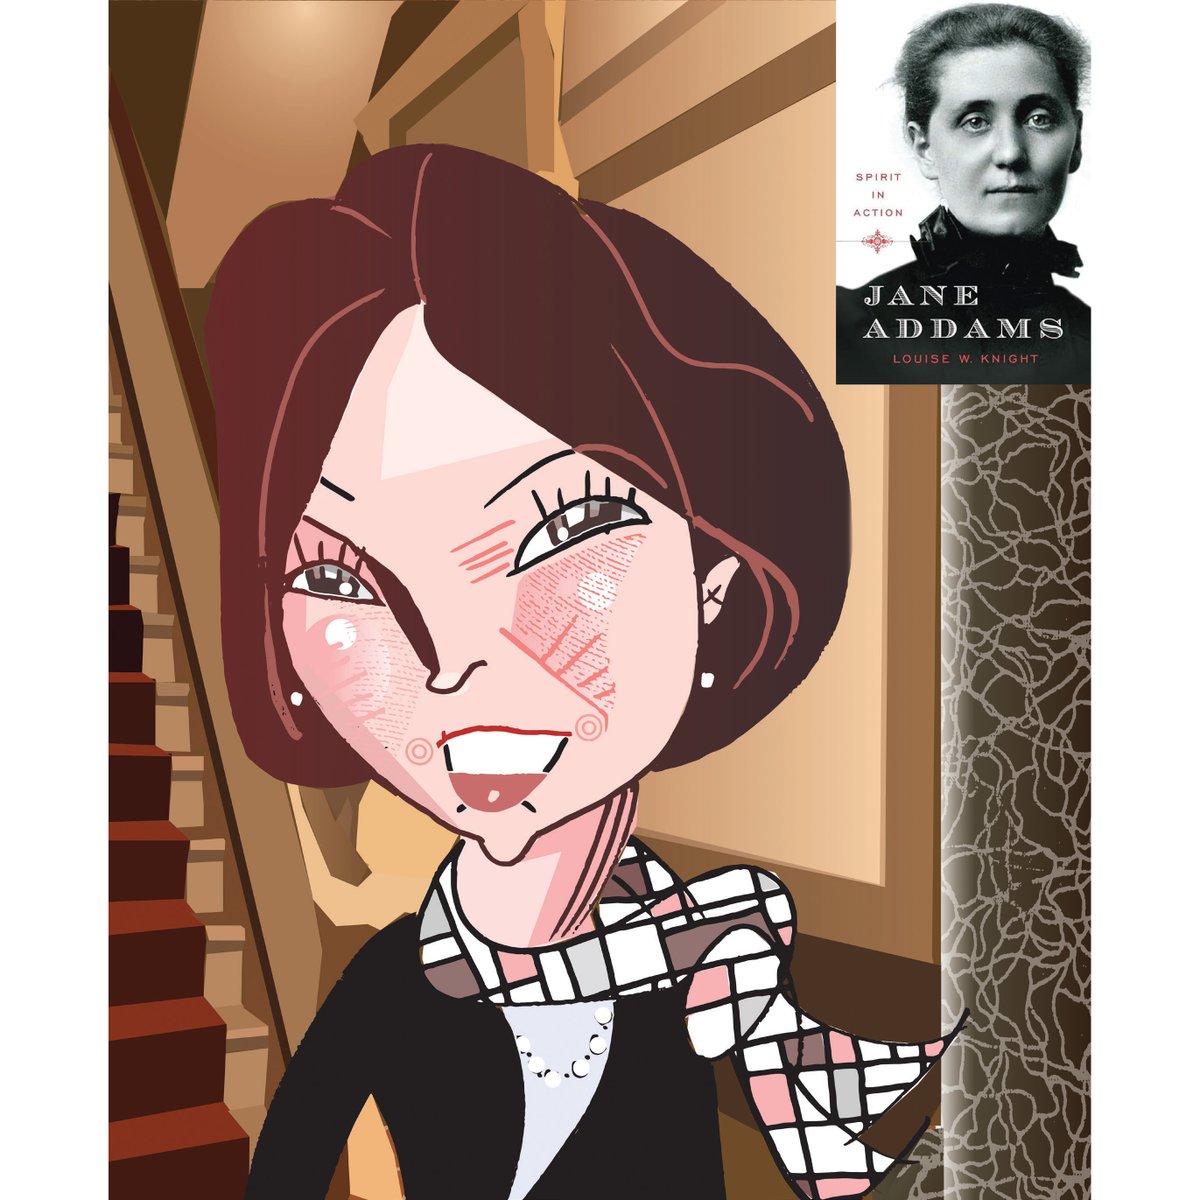 Sunny Fischer is a well-known Evanstonian and former teacher at North Shore Country Day and Lake Forest Academy who has dedicated her life’s work to philanthropy, preservation, and pioneering change throughout Chicago. bit.ly/3Uocdjp Illustration: Tom Bachtell